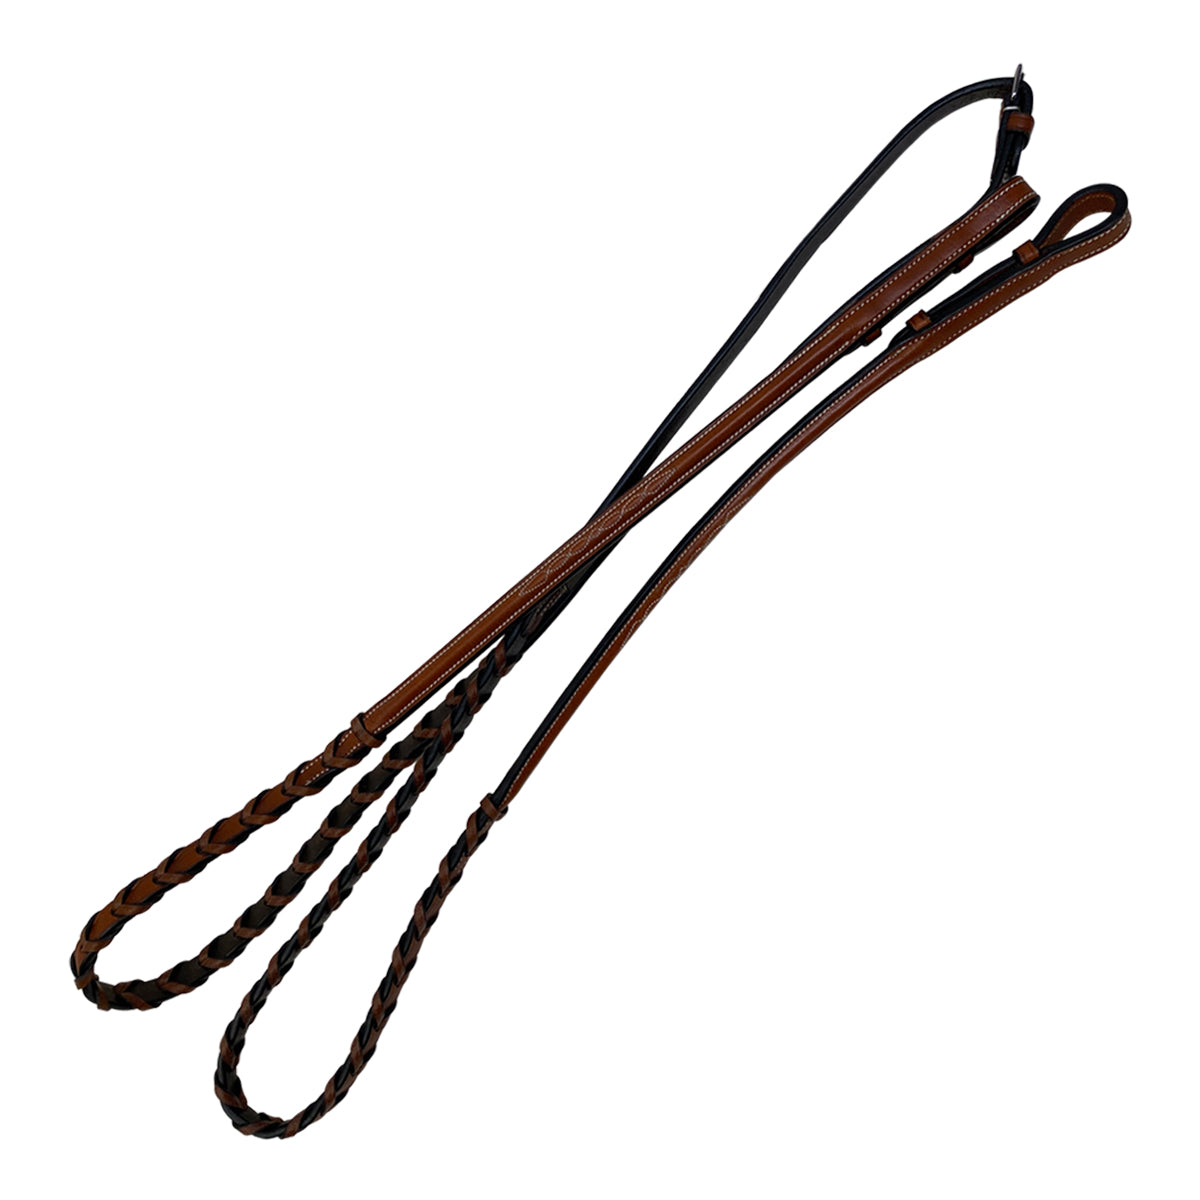 Bobby's English Tack Braided Reins in Light Brown